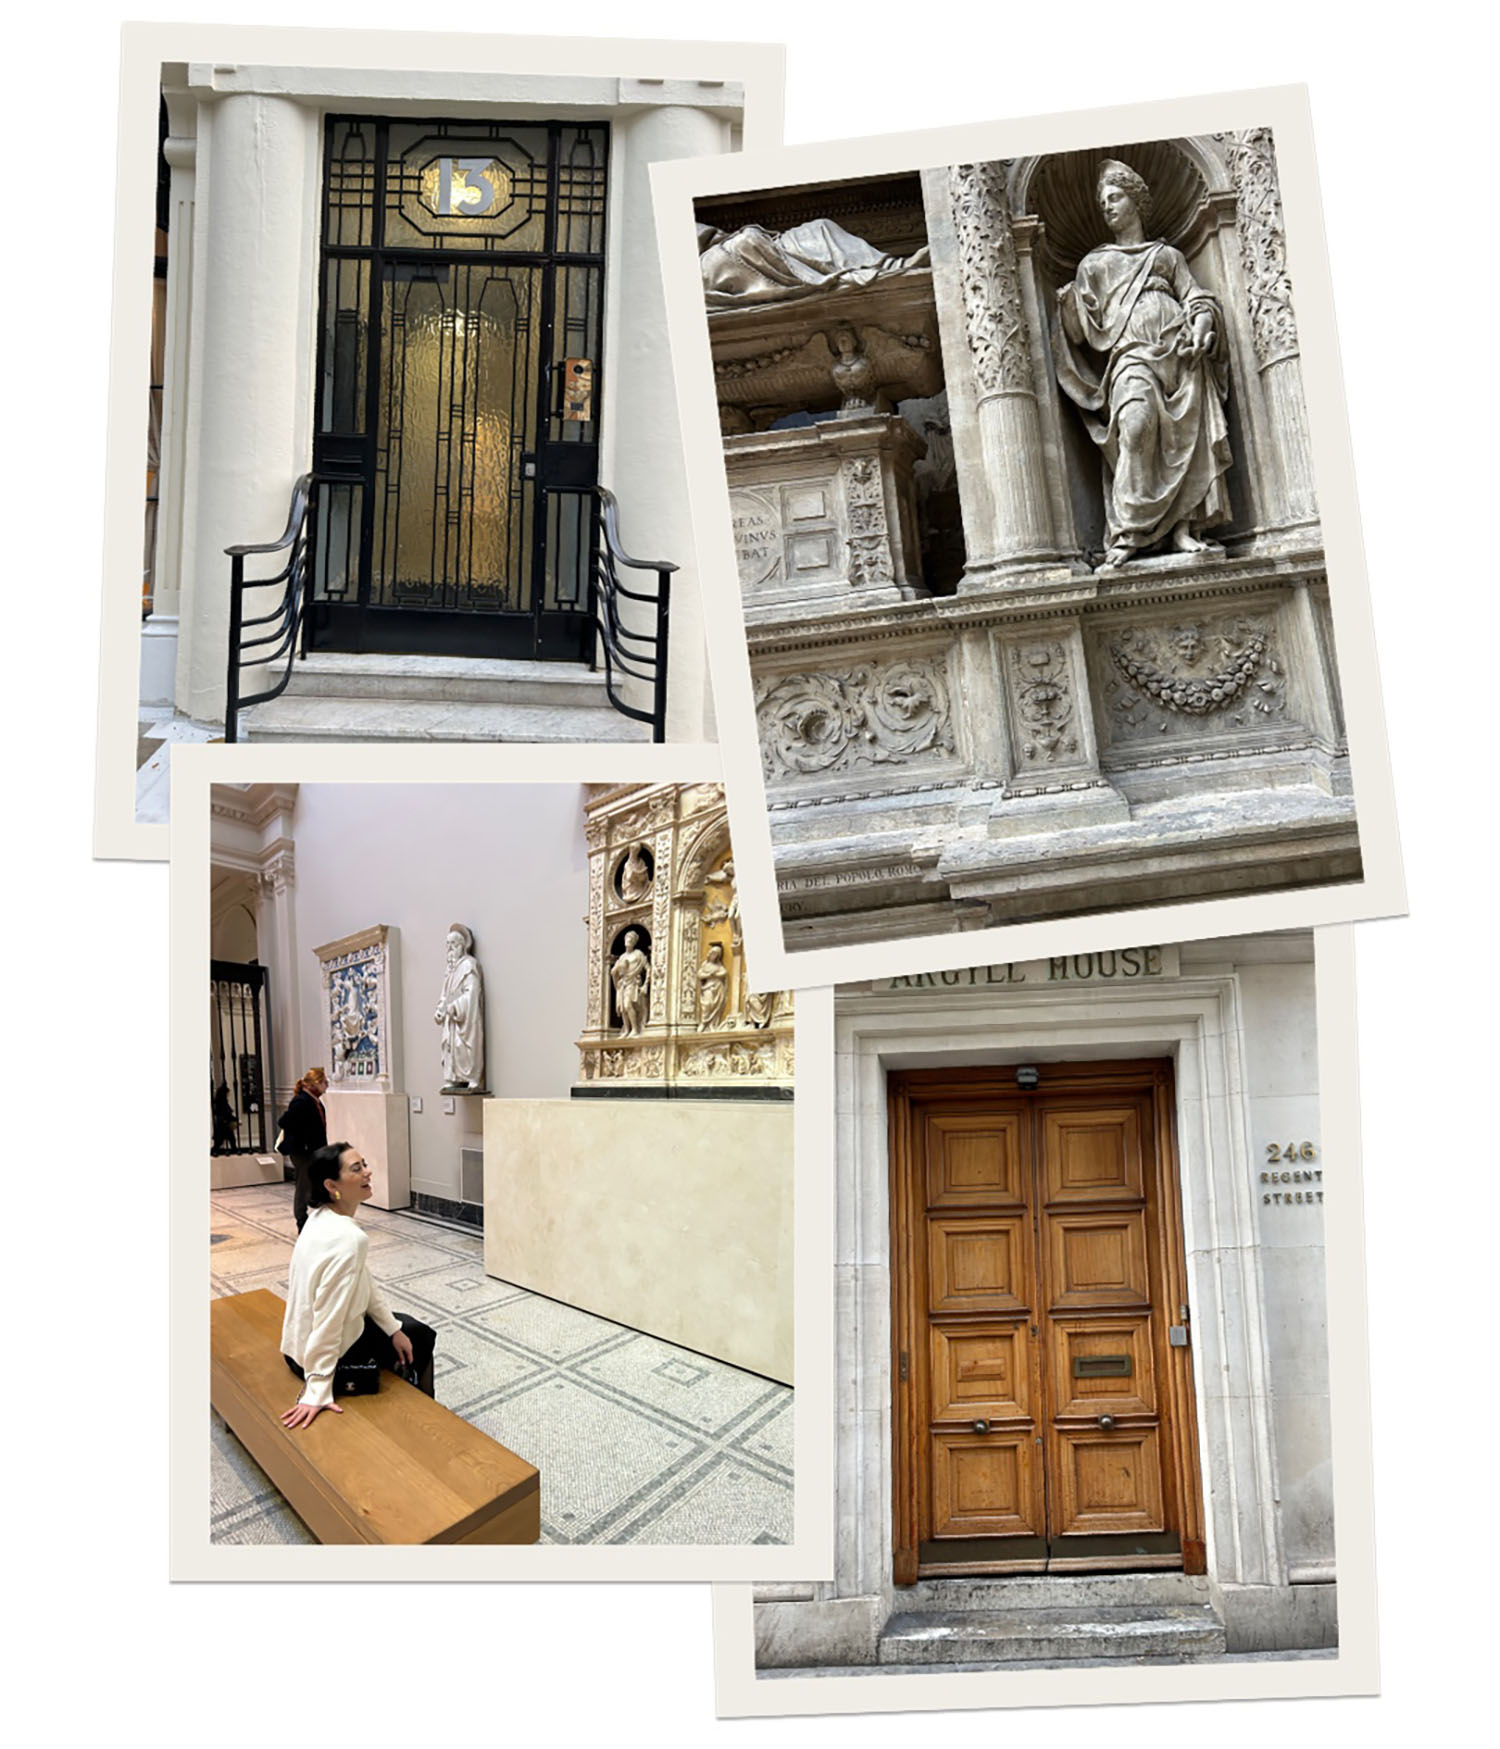 Coco & Vtolaire - Doorways, statues and museum visits in London